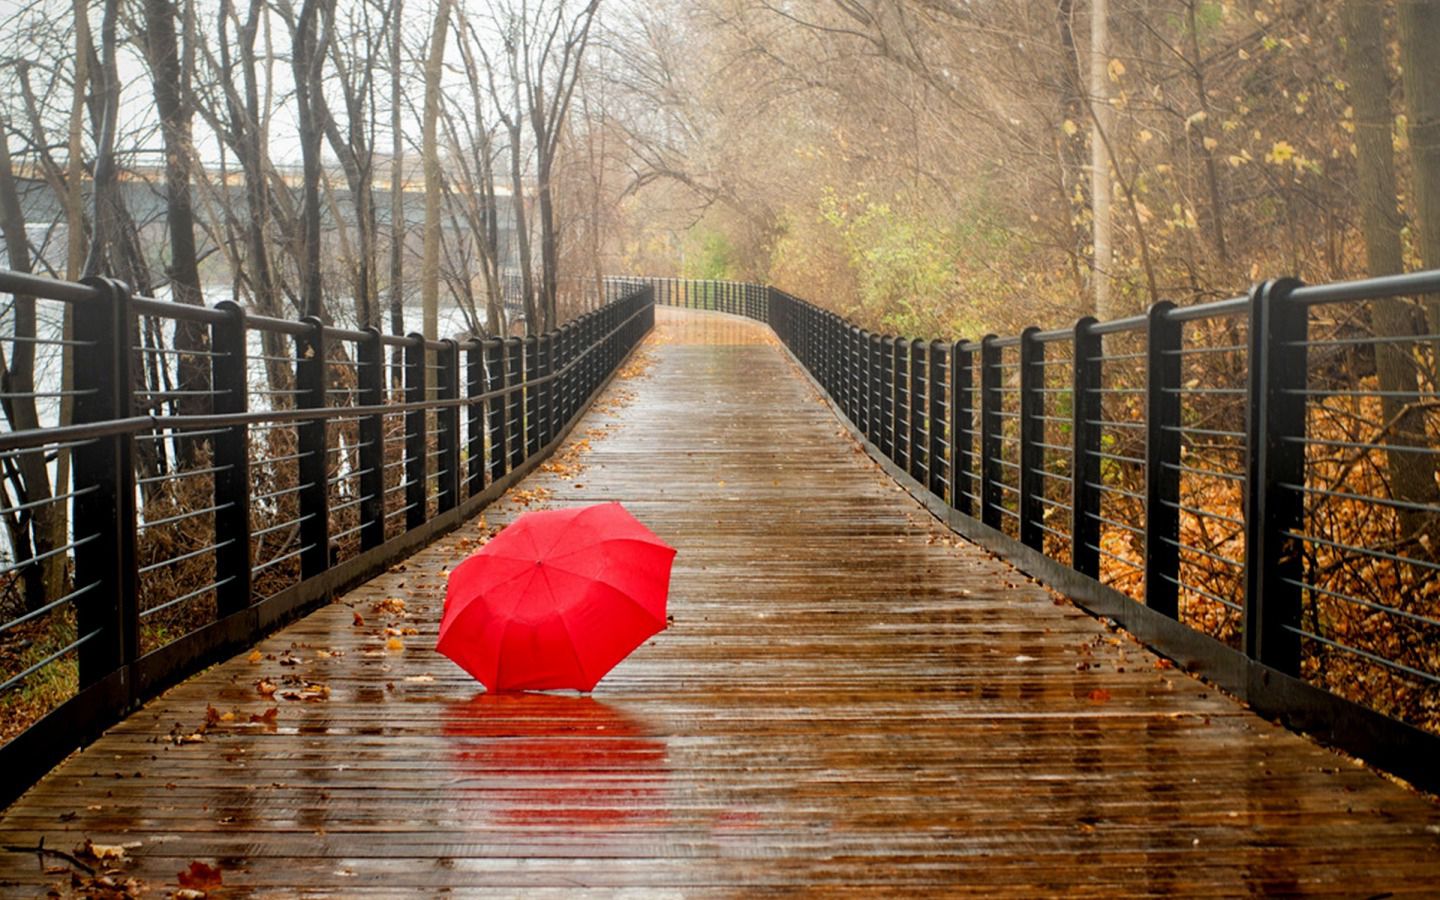 beautiful rainy day wallpapers for pc